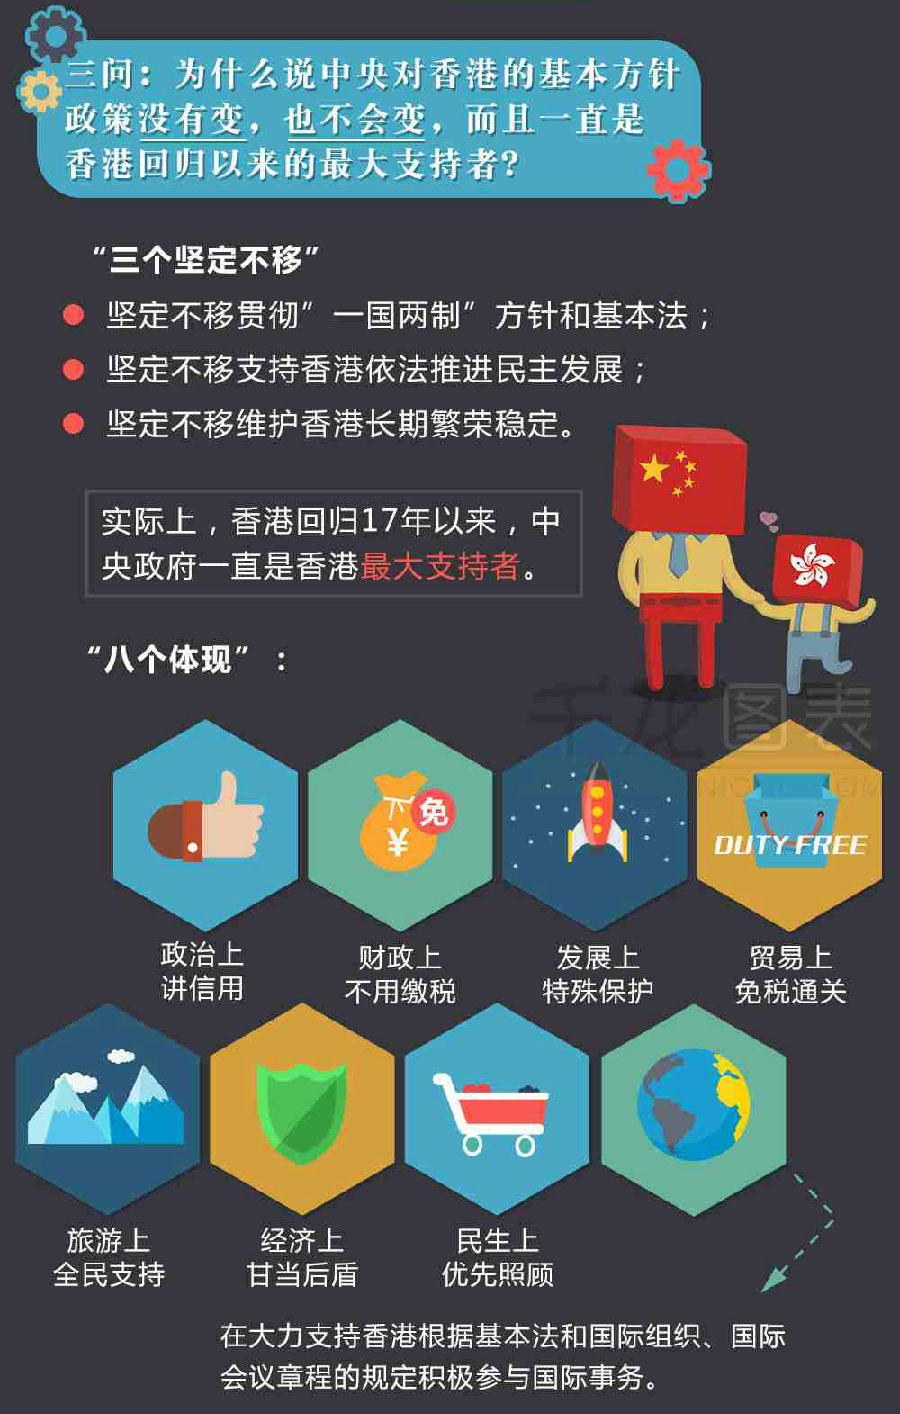 Infographic Department of the CCP (Part 2 of 5): The Three Unswerving Perseverances